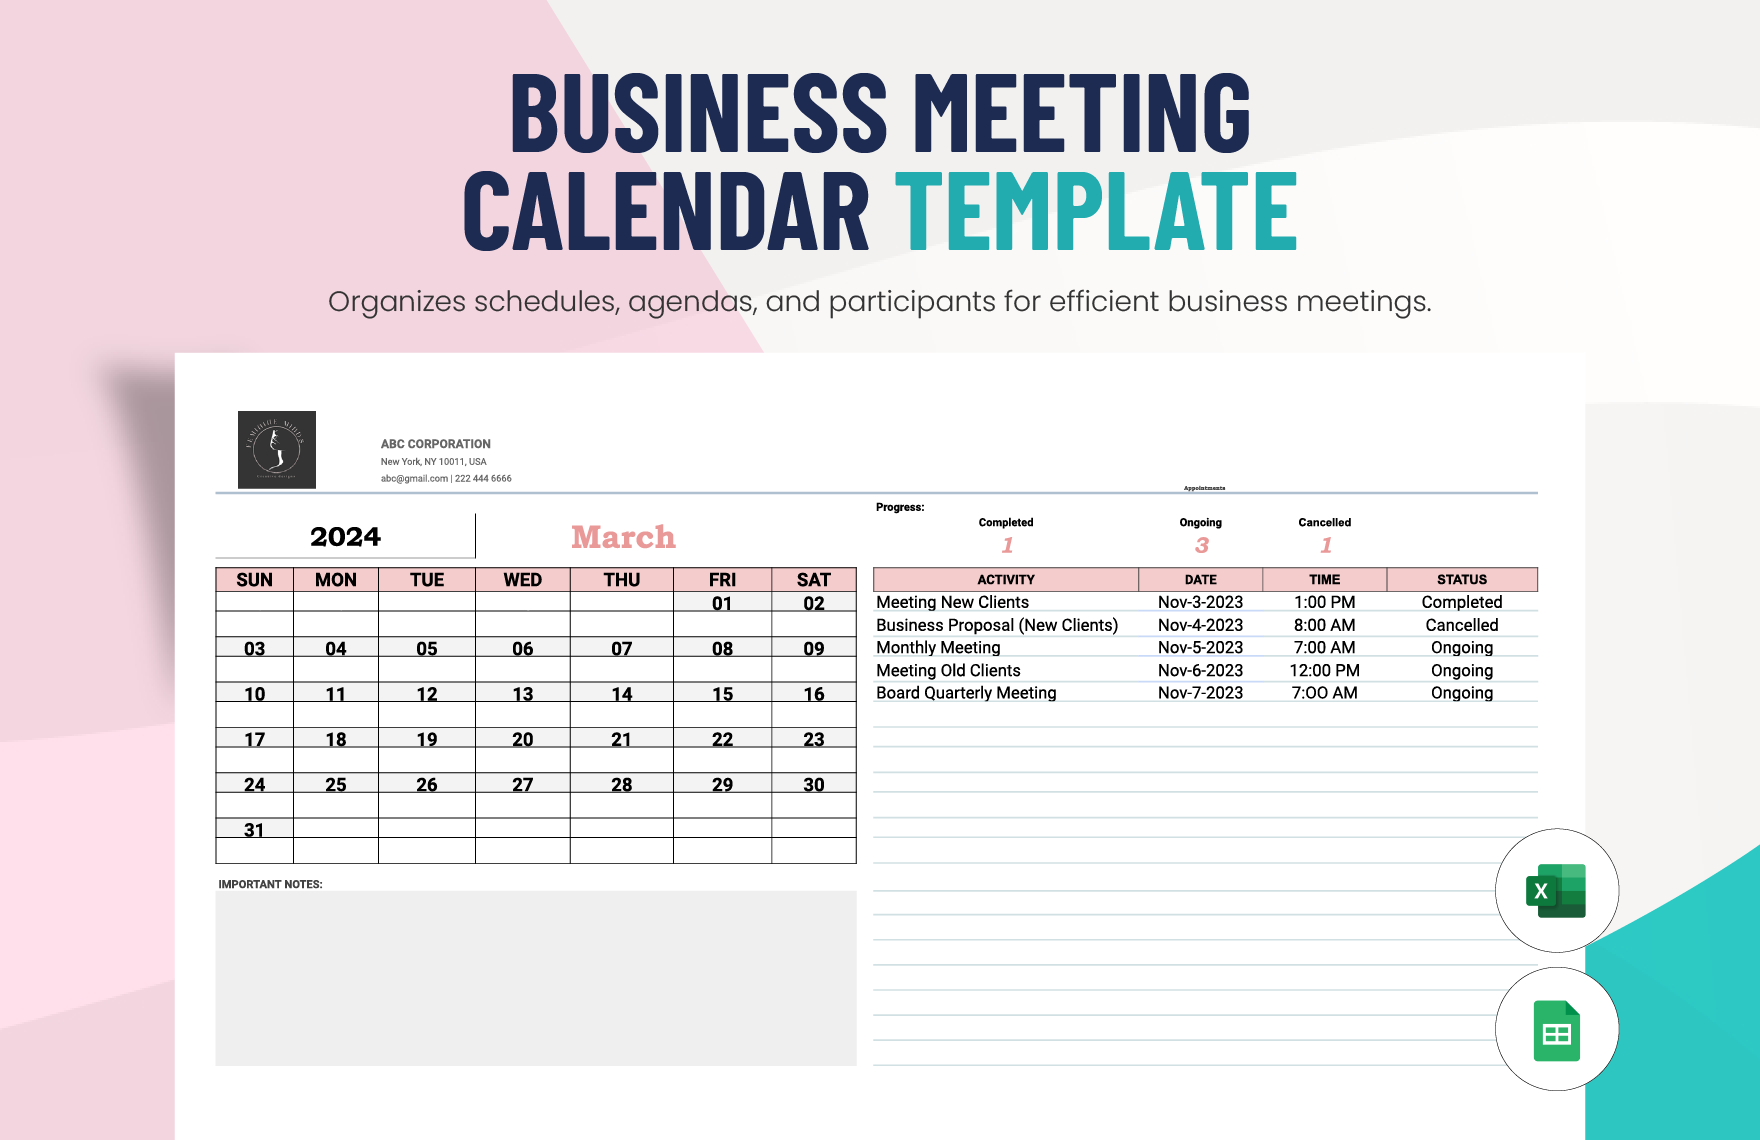 Business Meeting Calendar Template in Excel, Google Sheets